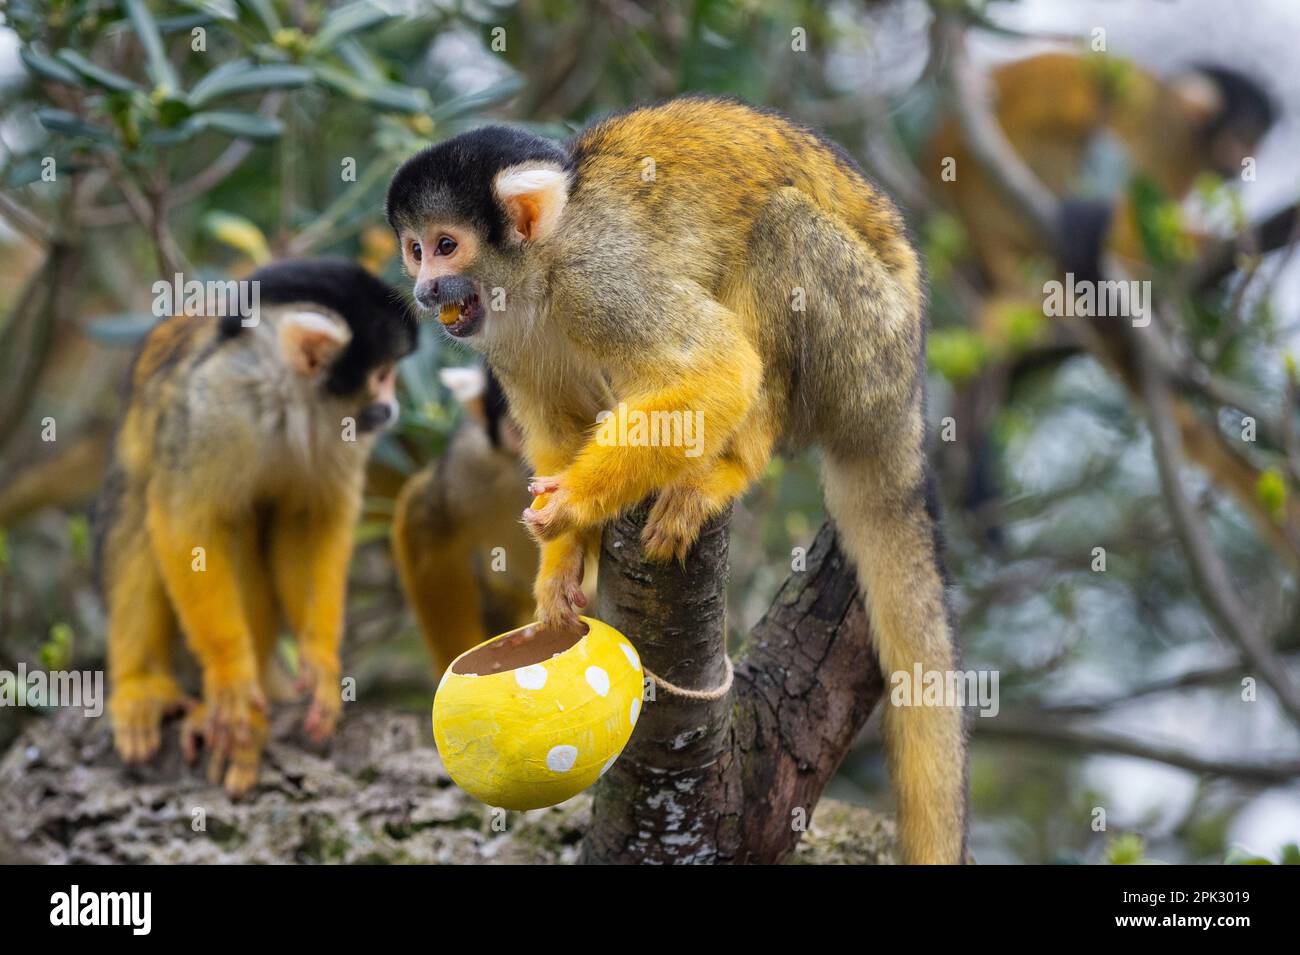 London, UK.  5 April 2023. Bolivian black-capped squirrel monkeys forage amongst colourful eggs hanging in their treetop home, stuffed with their favourite steamed sweet potato, during a photocall at ZSL London Zoo ahead of the conservation zoo’s Zoo-normous Egg Hunt over the Easter Holidays.  Running to 16 April, children are invited to join an egg hunt following educational animal-themed clues and un-scrambling riddles in order to crack the code and find the hidden Golden Egg.  Credit: Stephen Chung / Alamy Live News Stock Photo